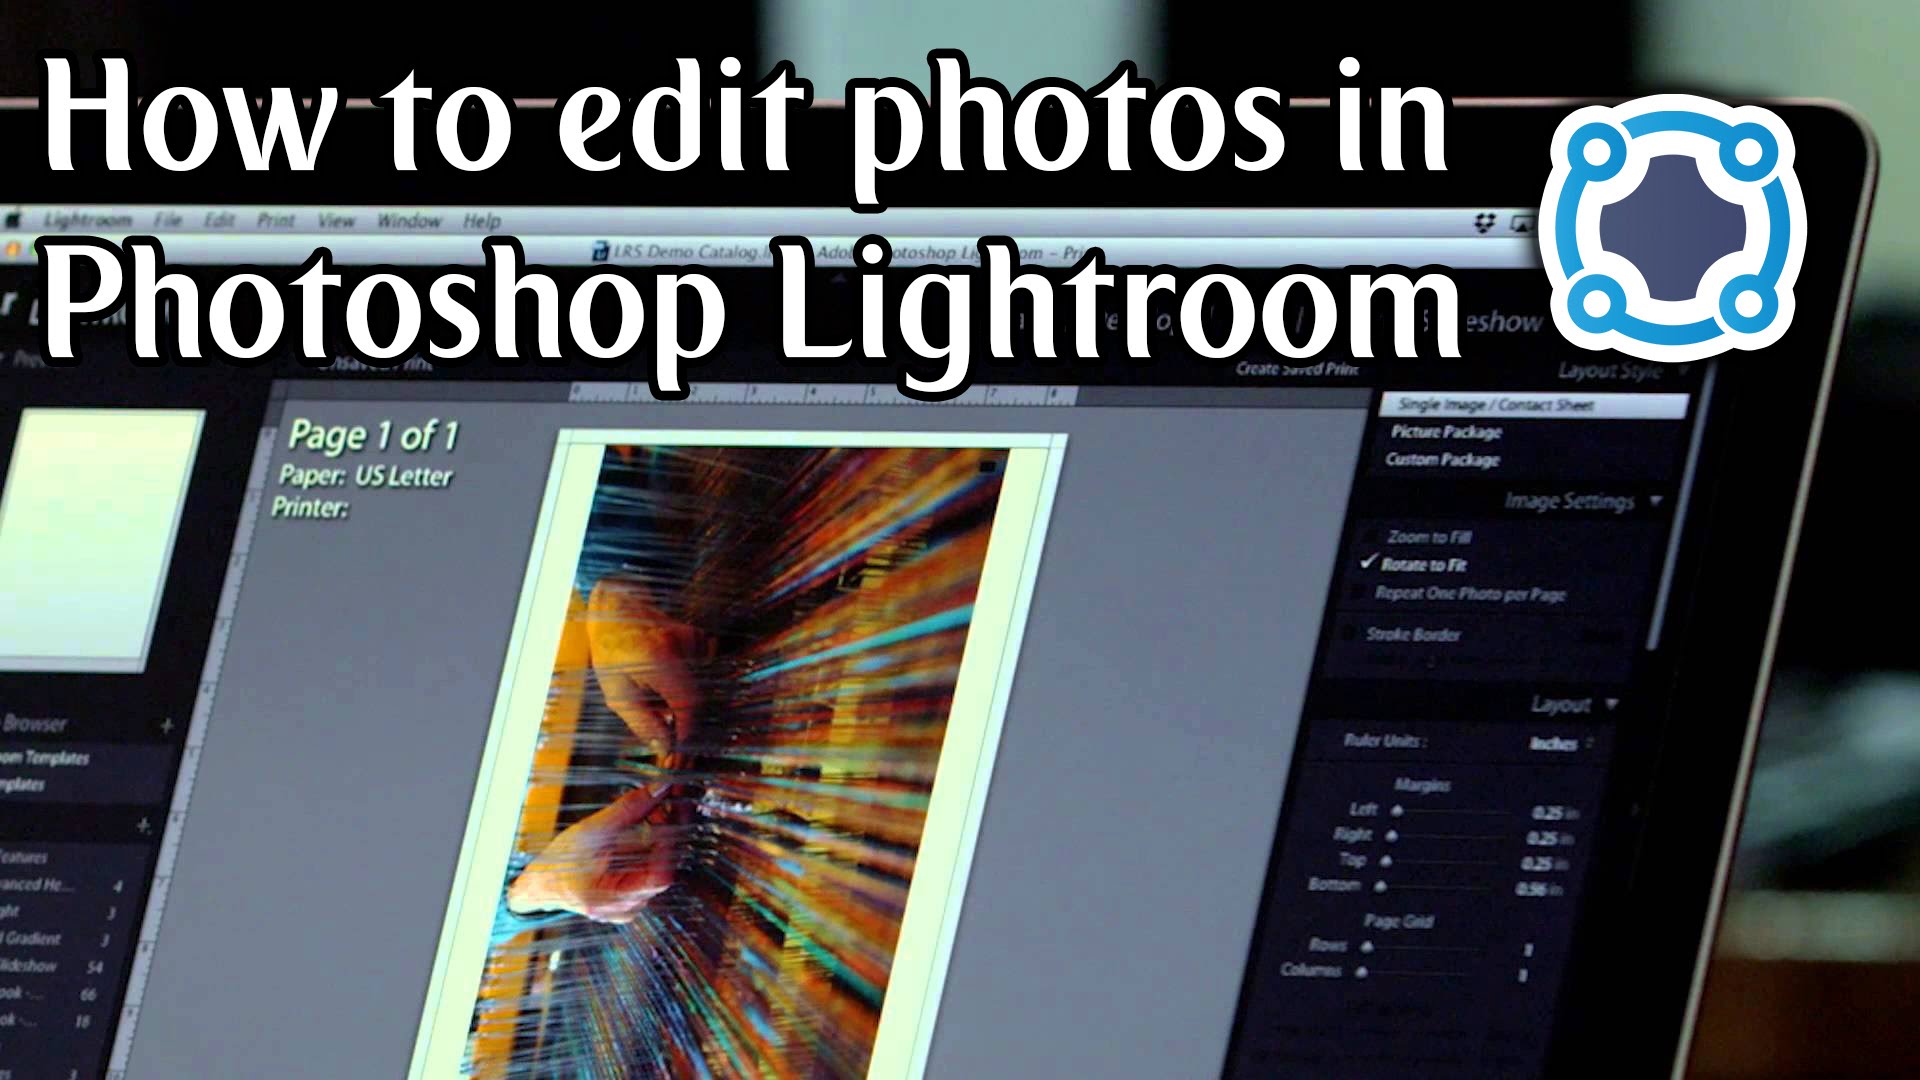 How To Edit Photos In Photoshop Lightroom